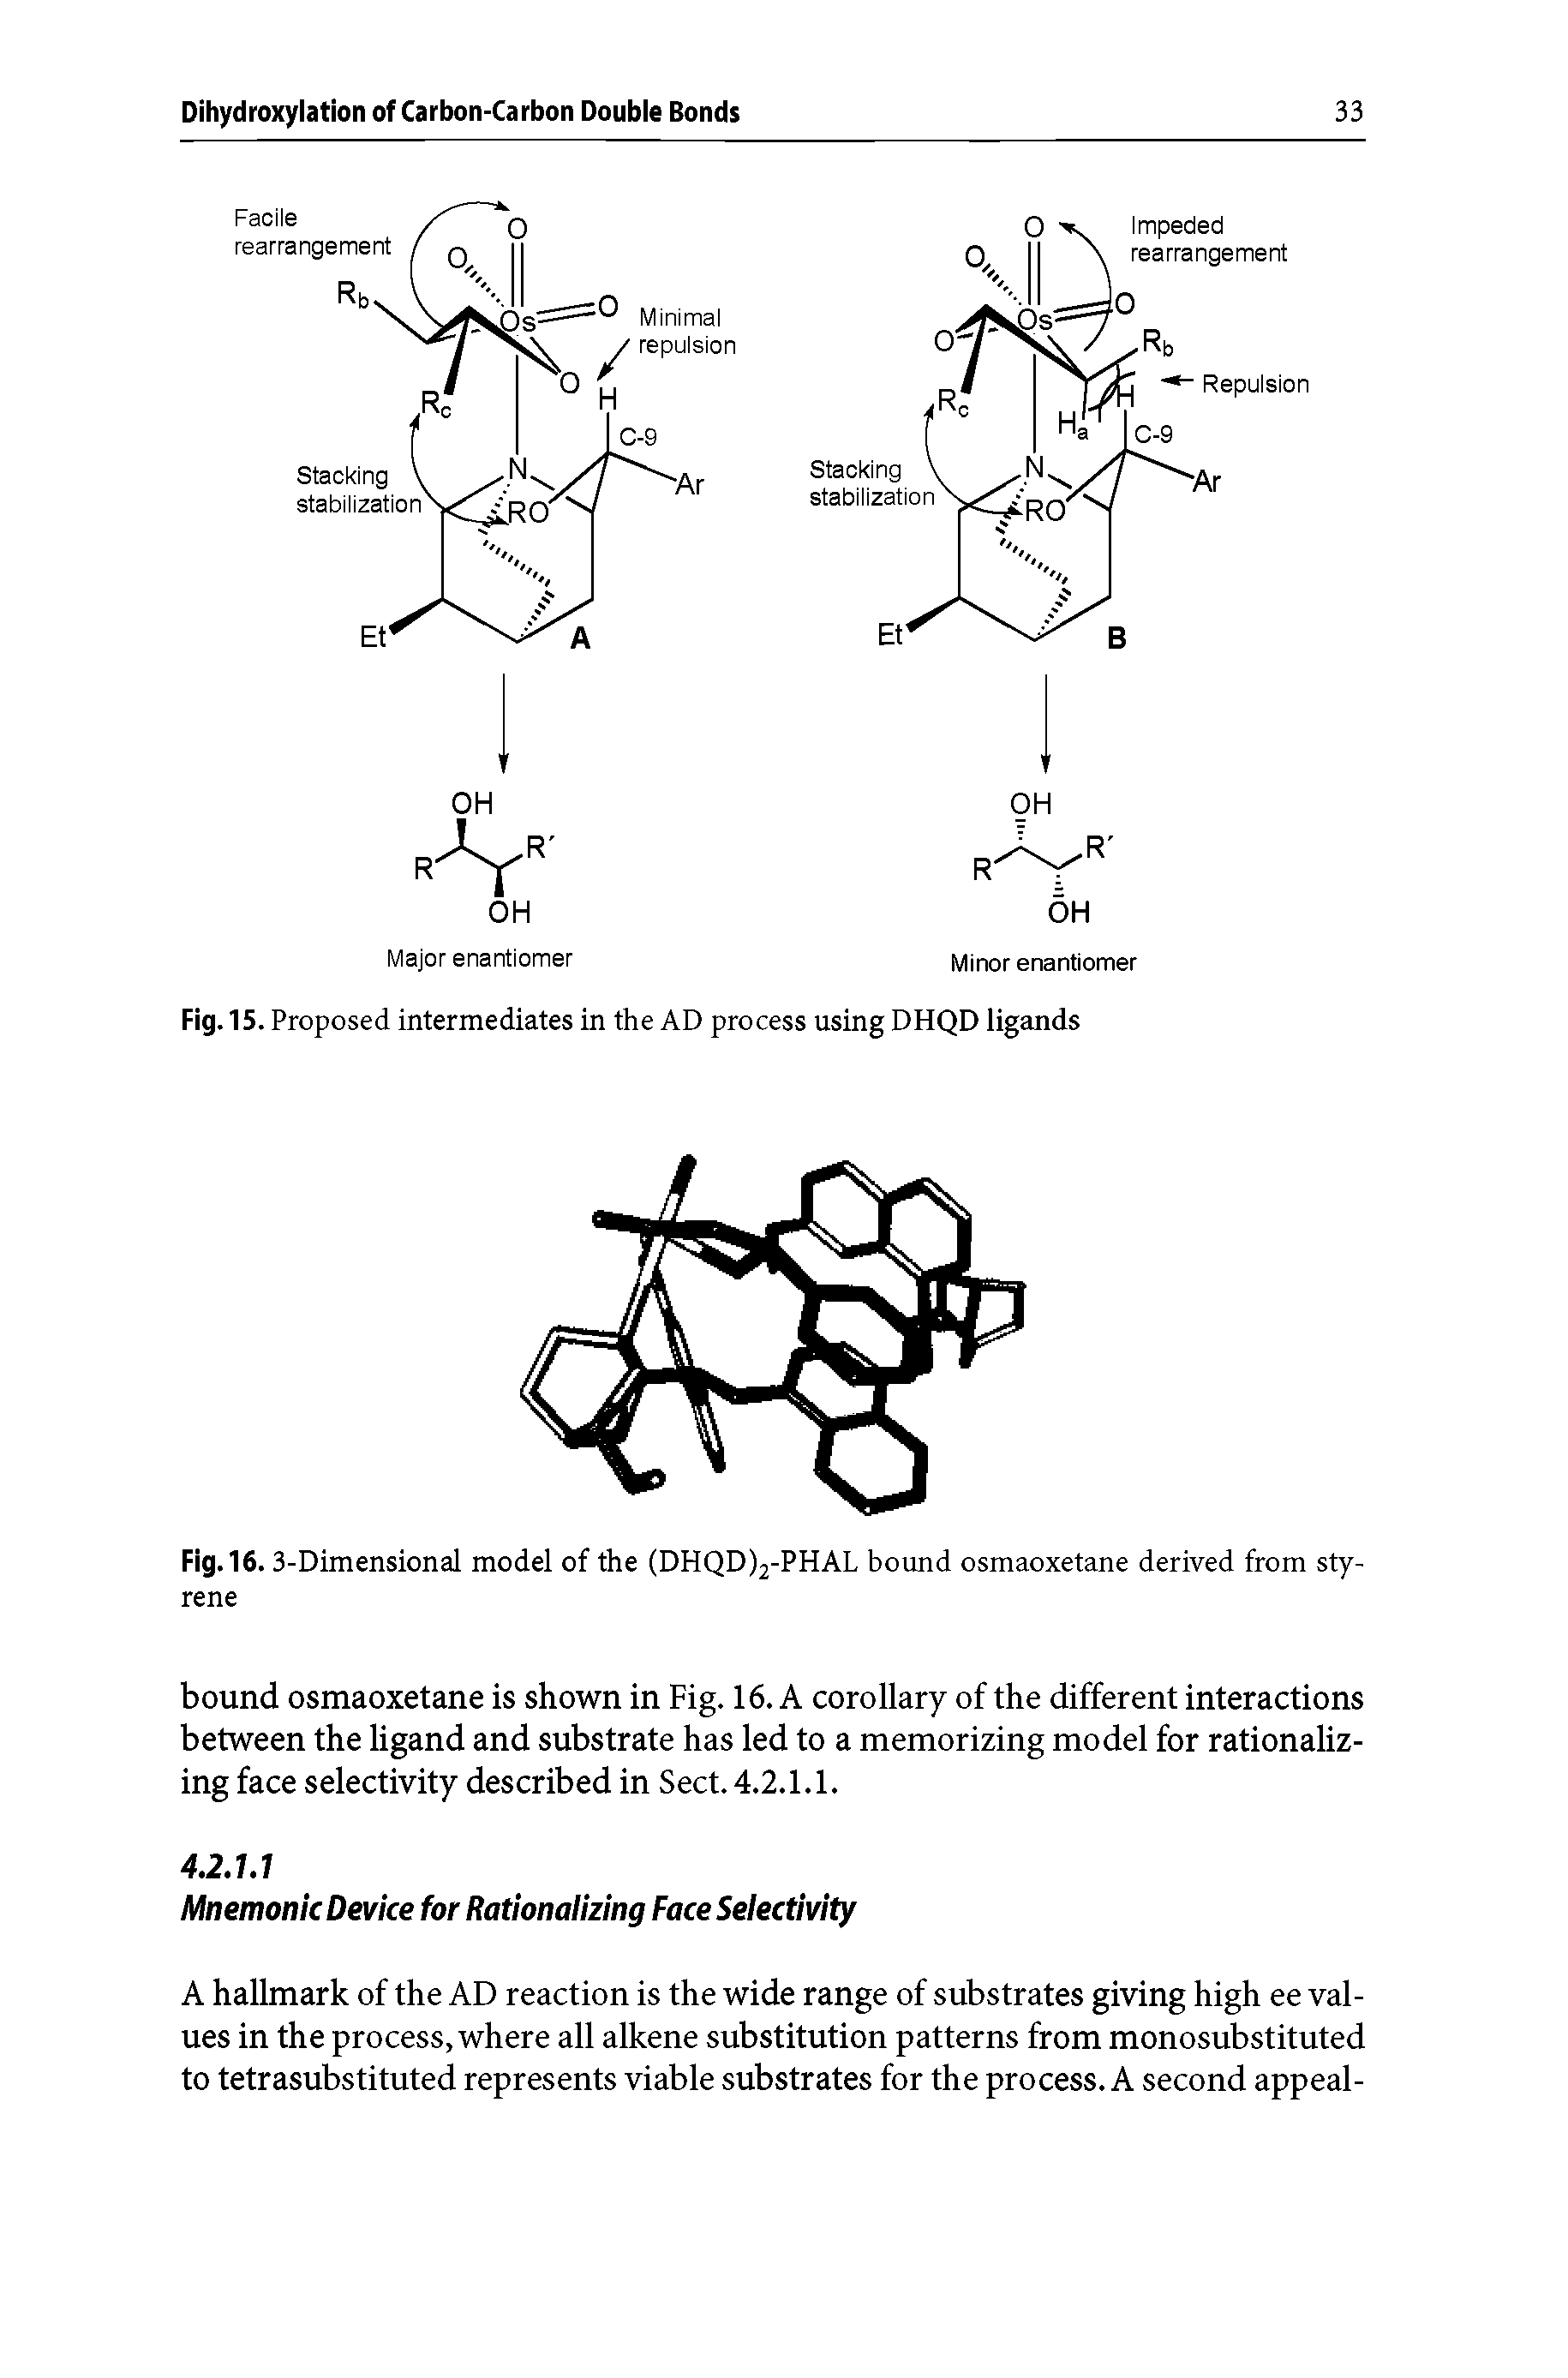 Fig. 15. Proposed intermediates in the AD process using DHQD ligands...